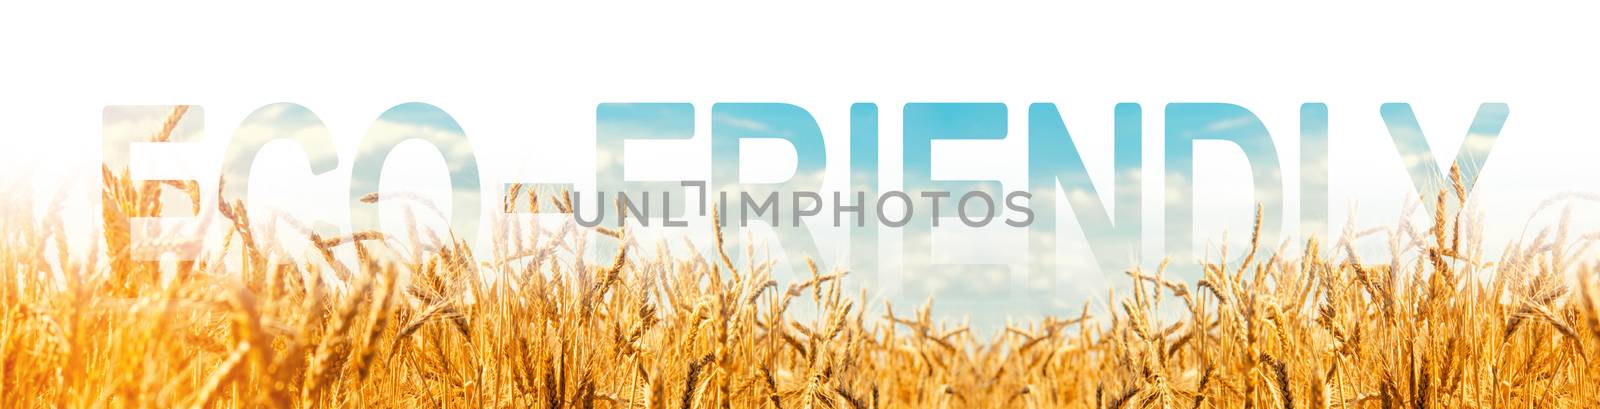 The inscription Eco-friendly on the background of a wheat plantation. Environmentally friendly harvest, quality control. yellow wheat grows in the soil. eco-friendly agricultural products.